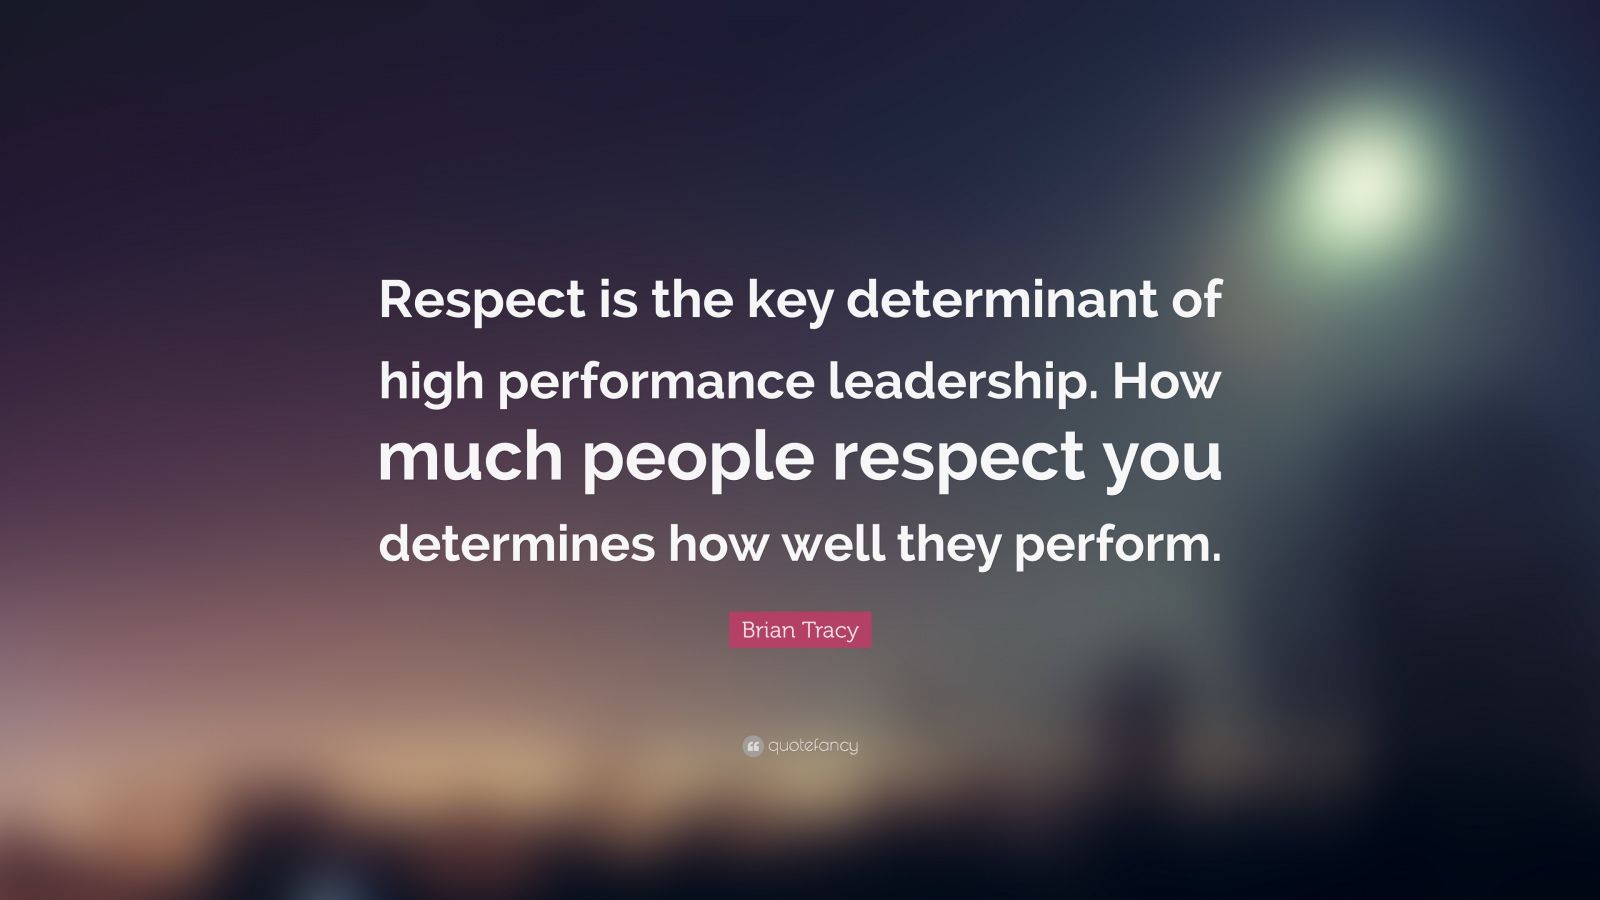 Brian Tracy Quote: “Respect is the key determinant of high performance